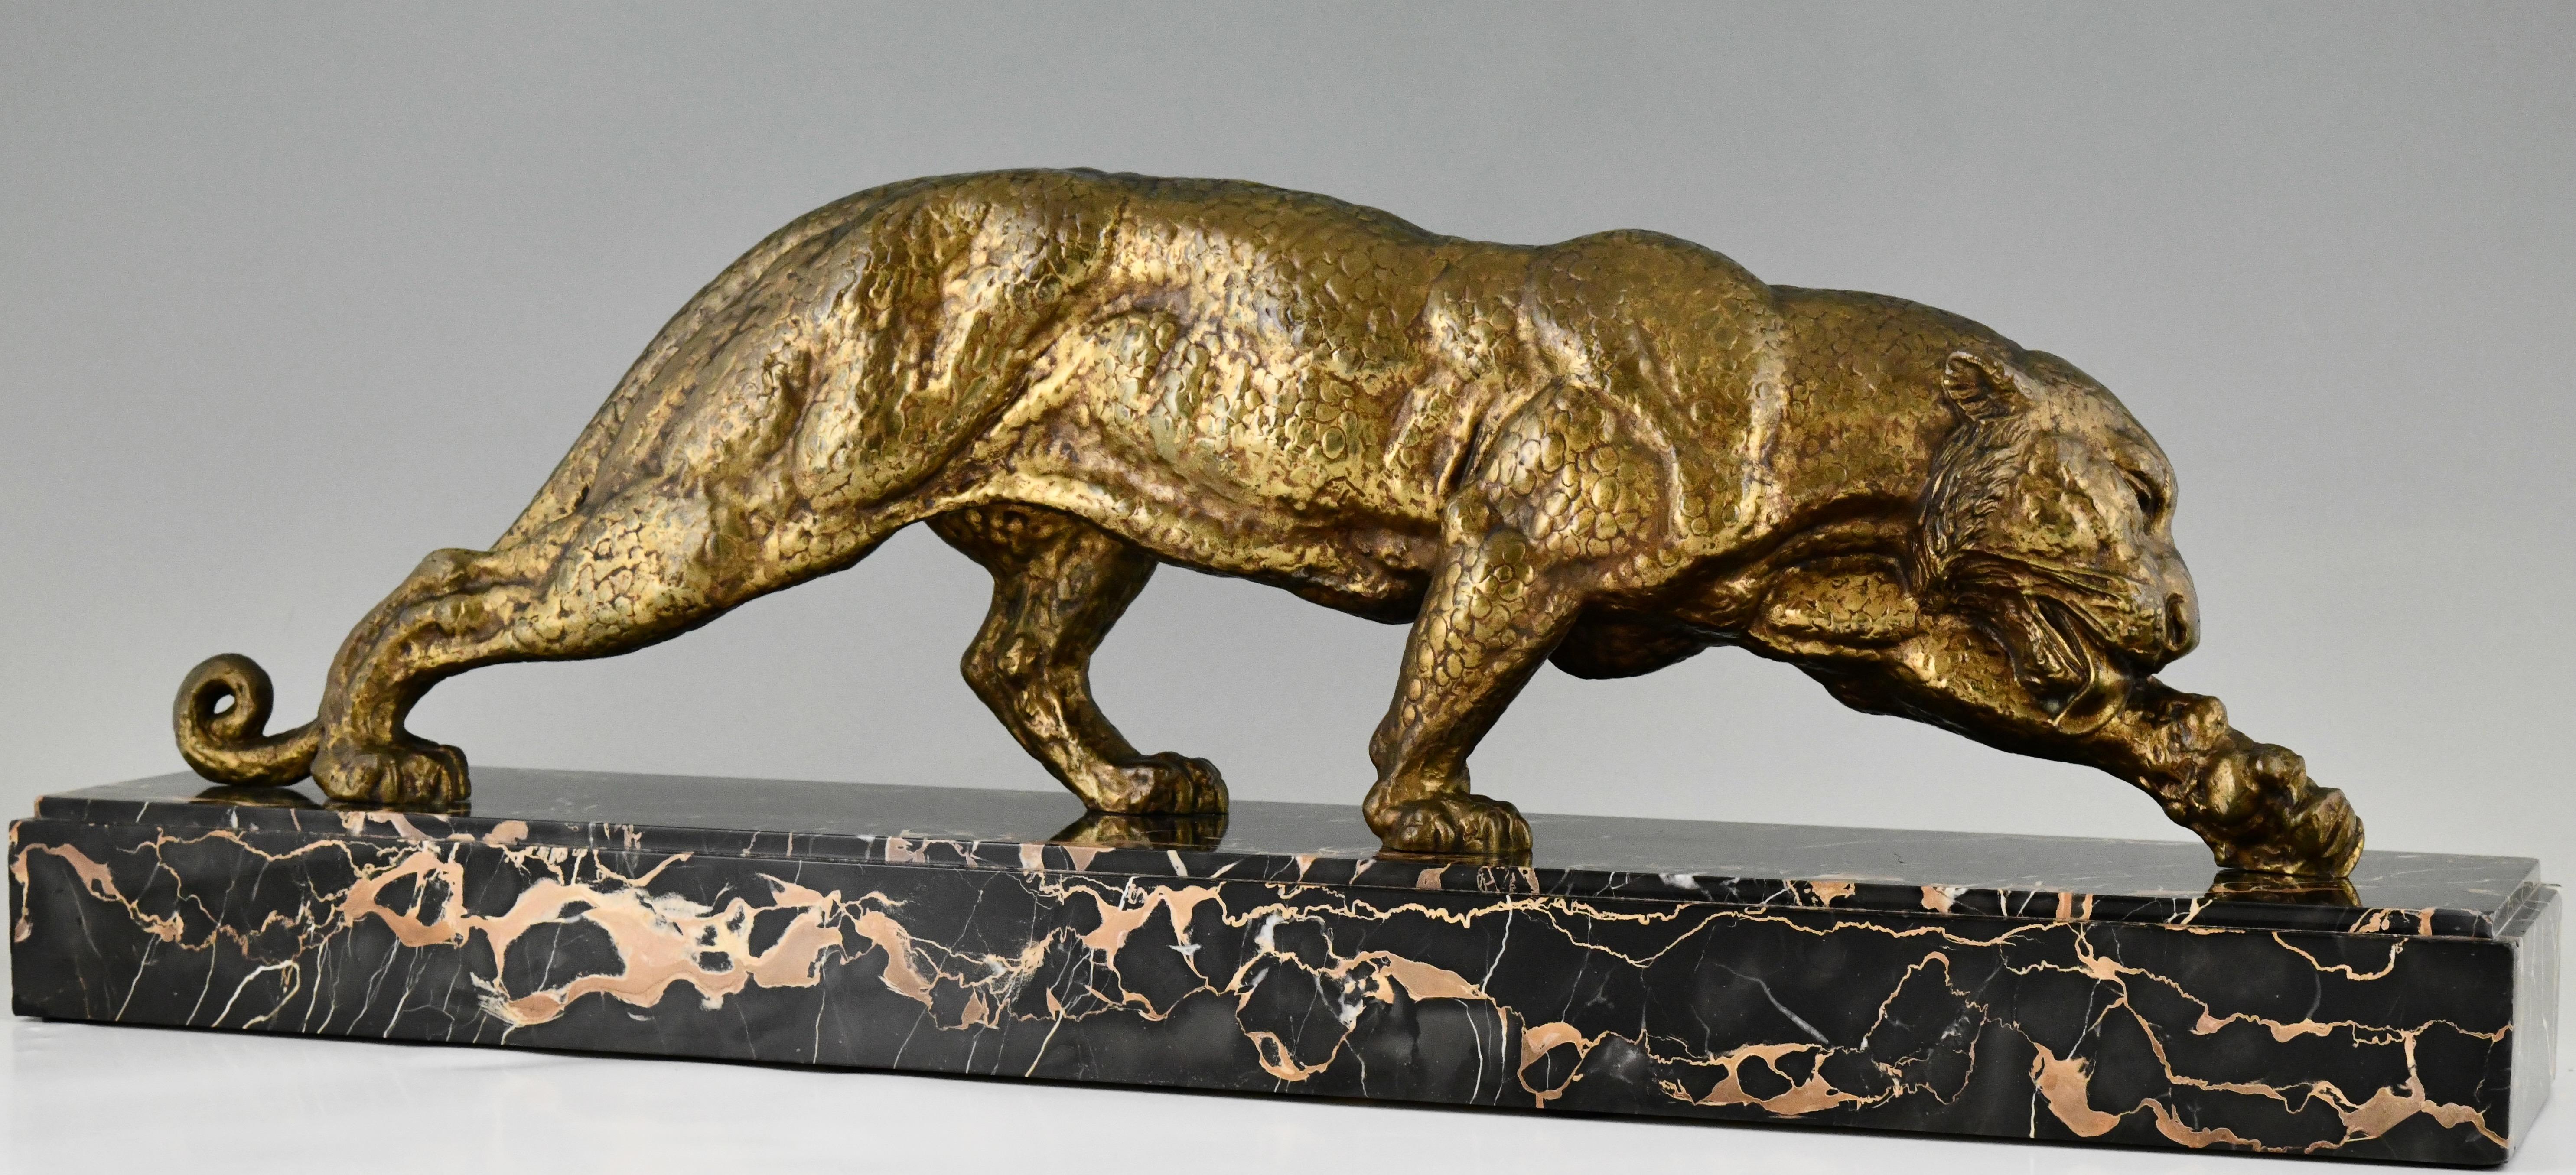 Art Deco bronze sculpture of a panther by Demetre Chiparus. 
Patinated bronze sculpture on a Portor marble base. 
Signed and with founders signature
Editions Reveyrolis Paris, marked bronze veritable. 
France 1930. 
This sculpture is illustrated in